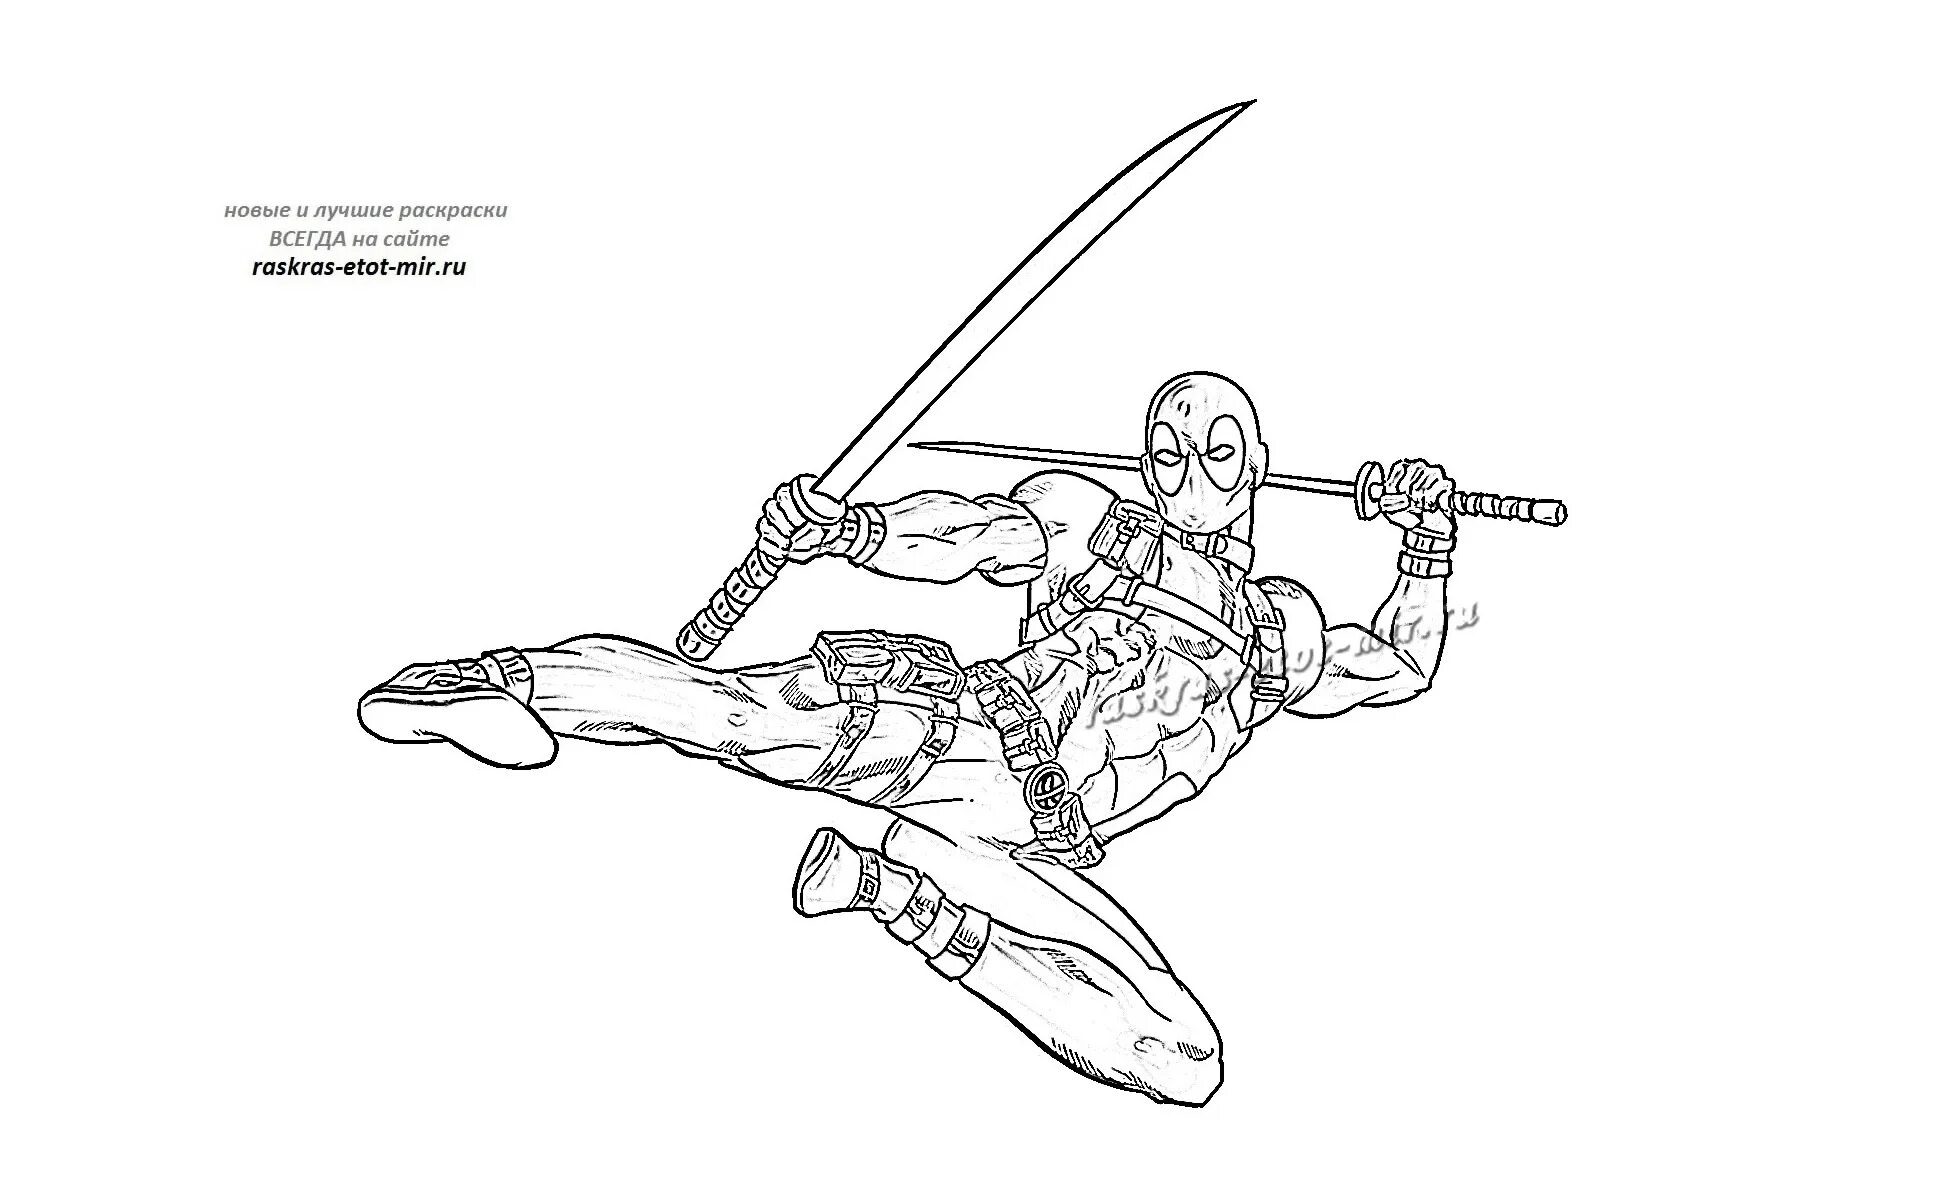 Attractive deadpool and spiderman coloring pages for kids